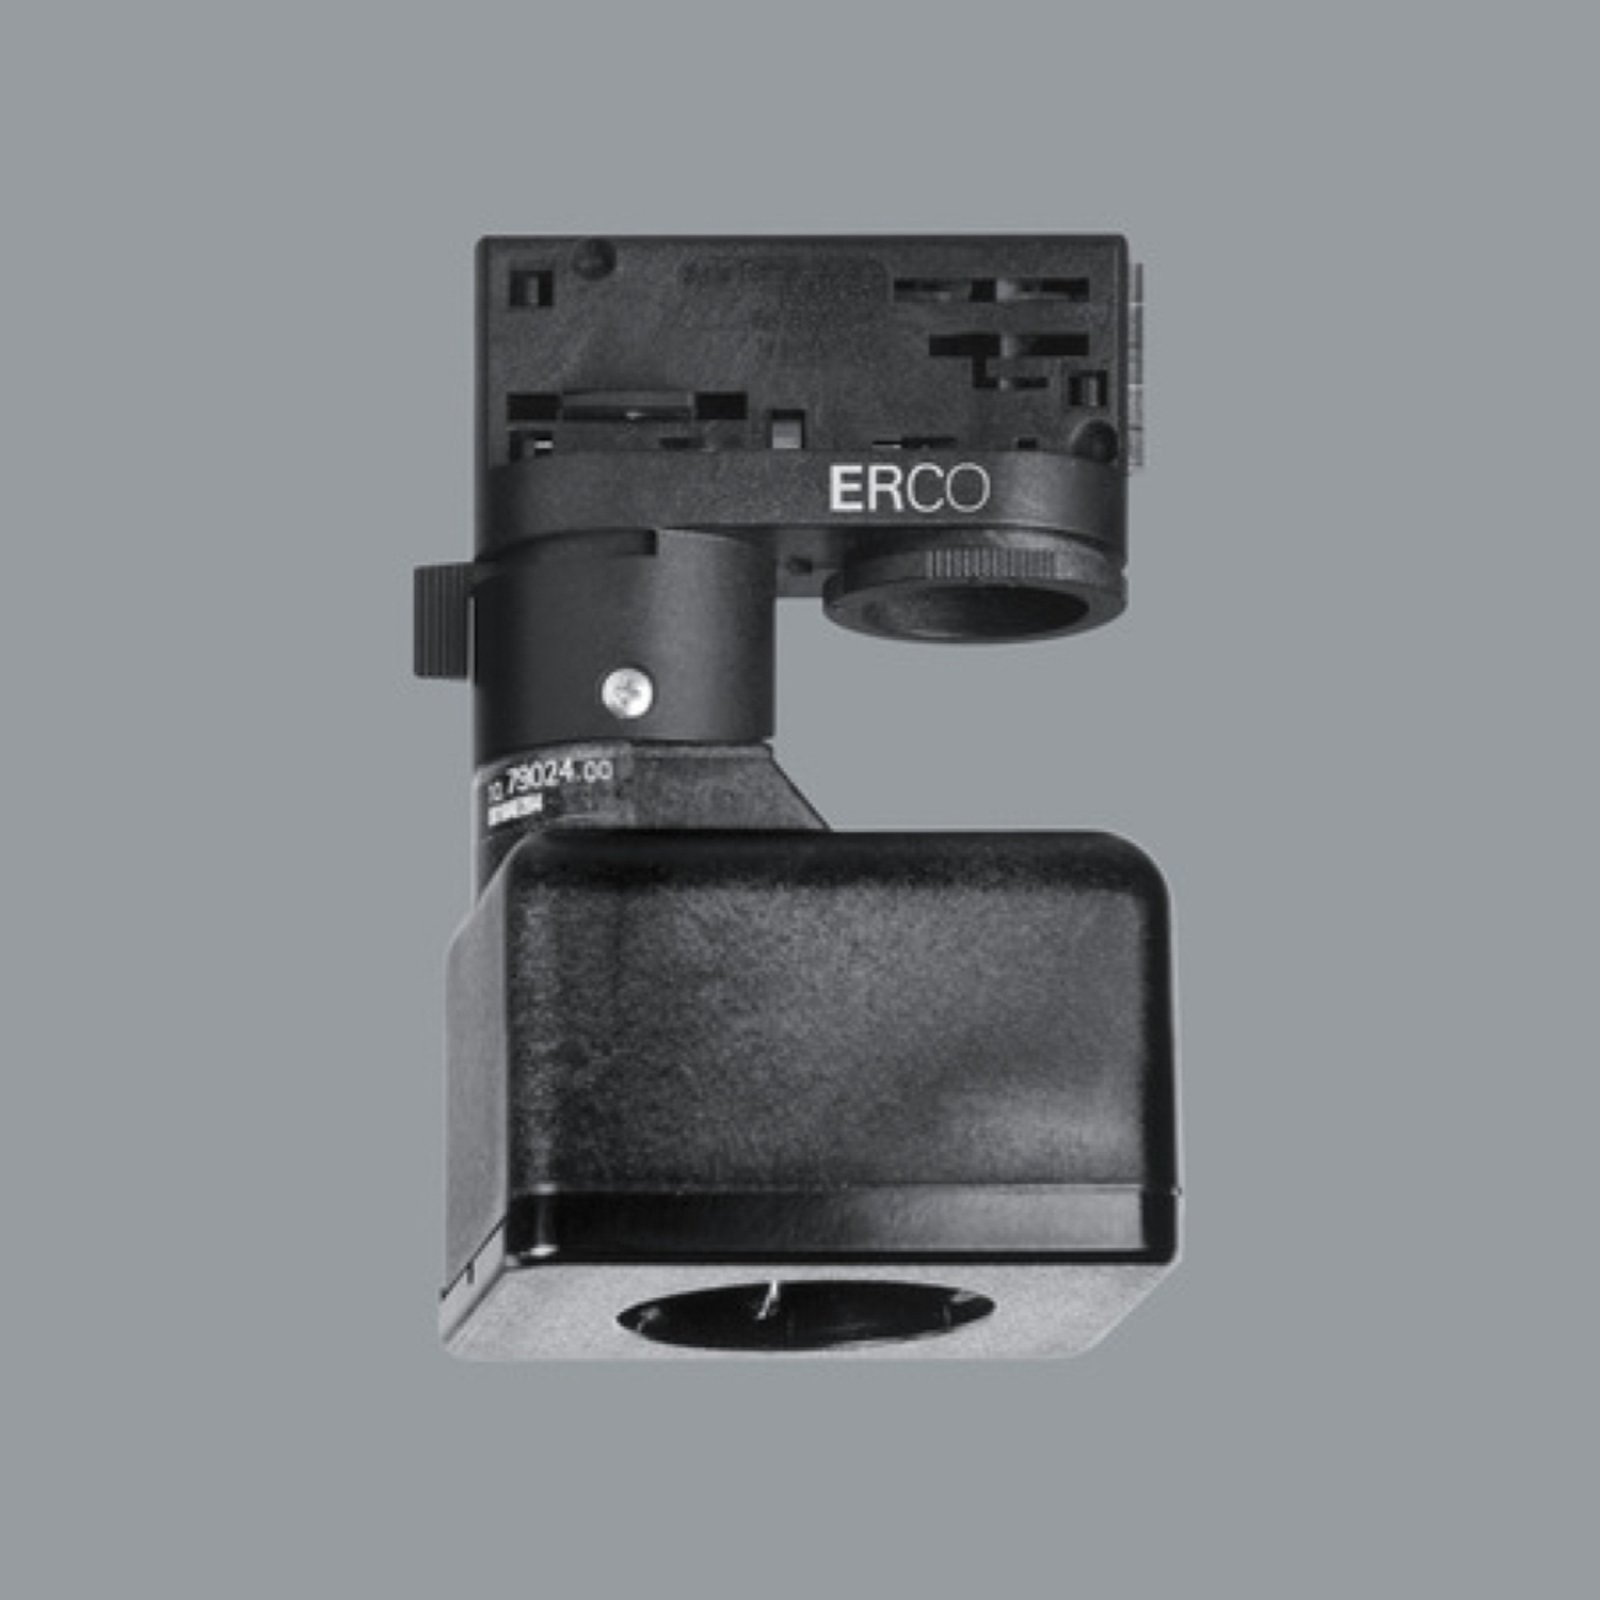 ERCO 3-circuit adapter with a Schuko socket, black